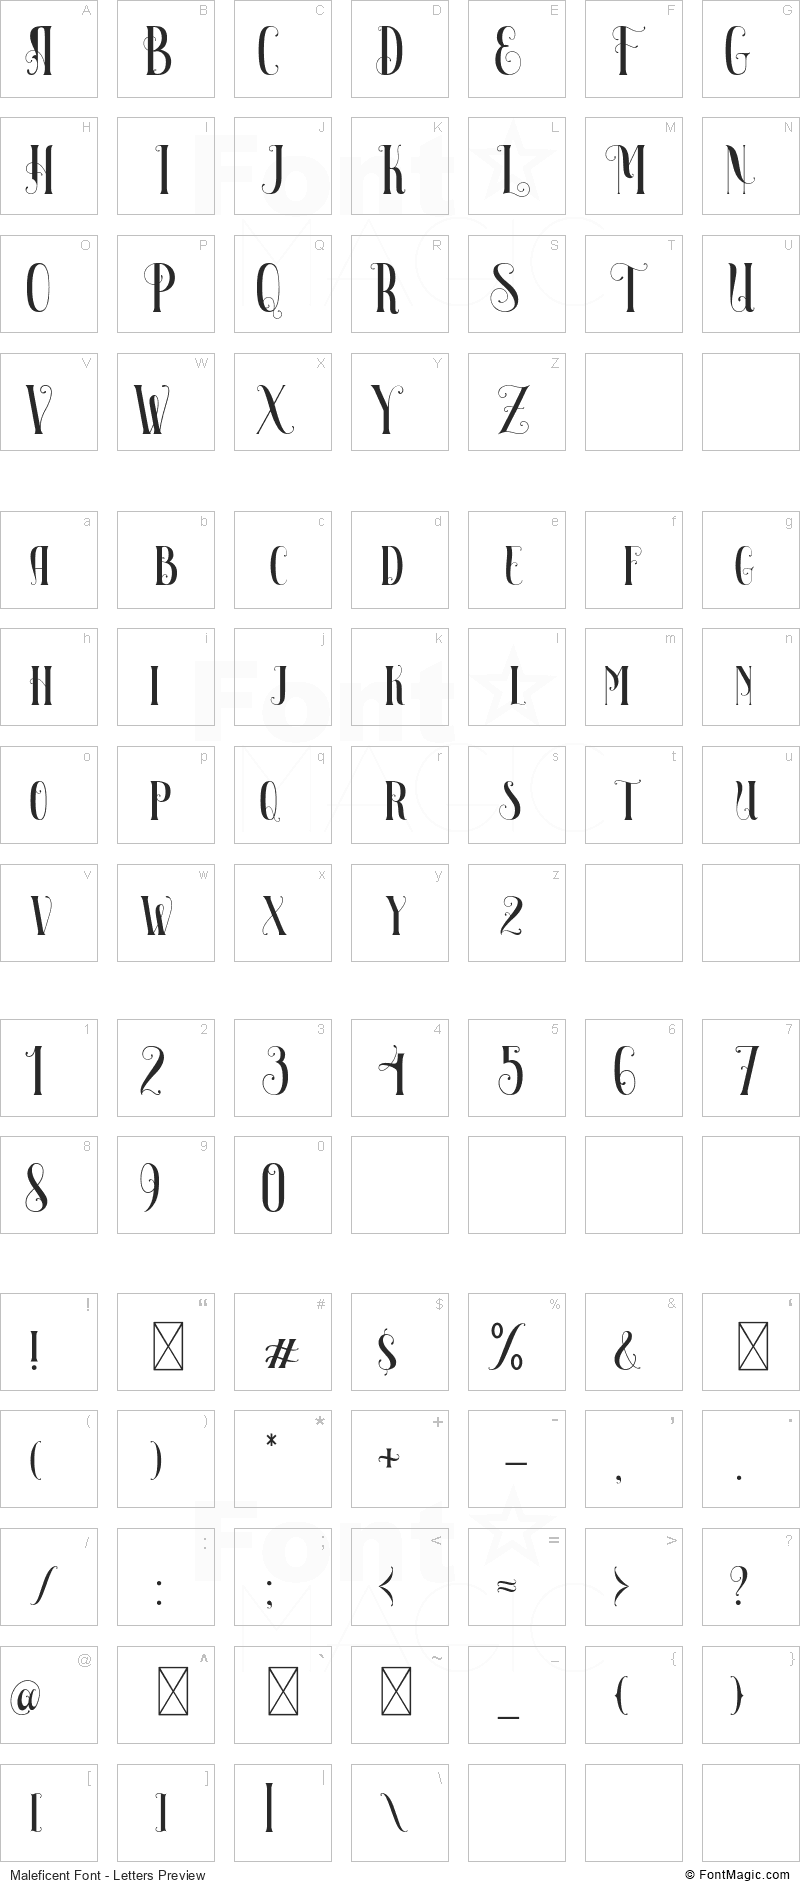 Maleficent Font - All Latters Preview Chart